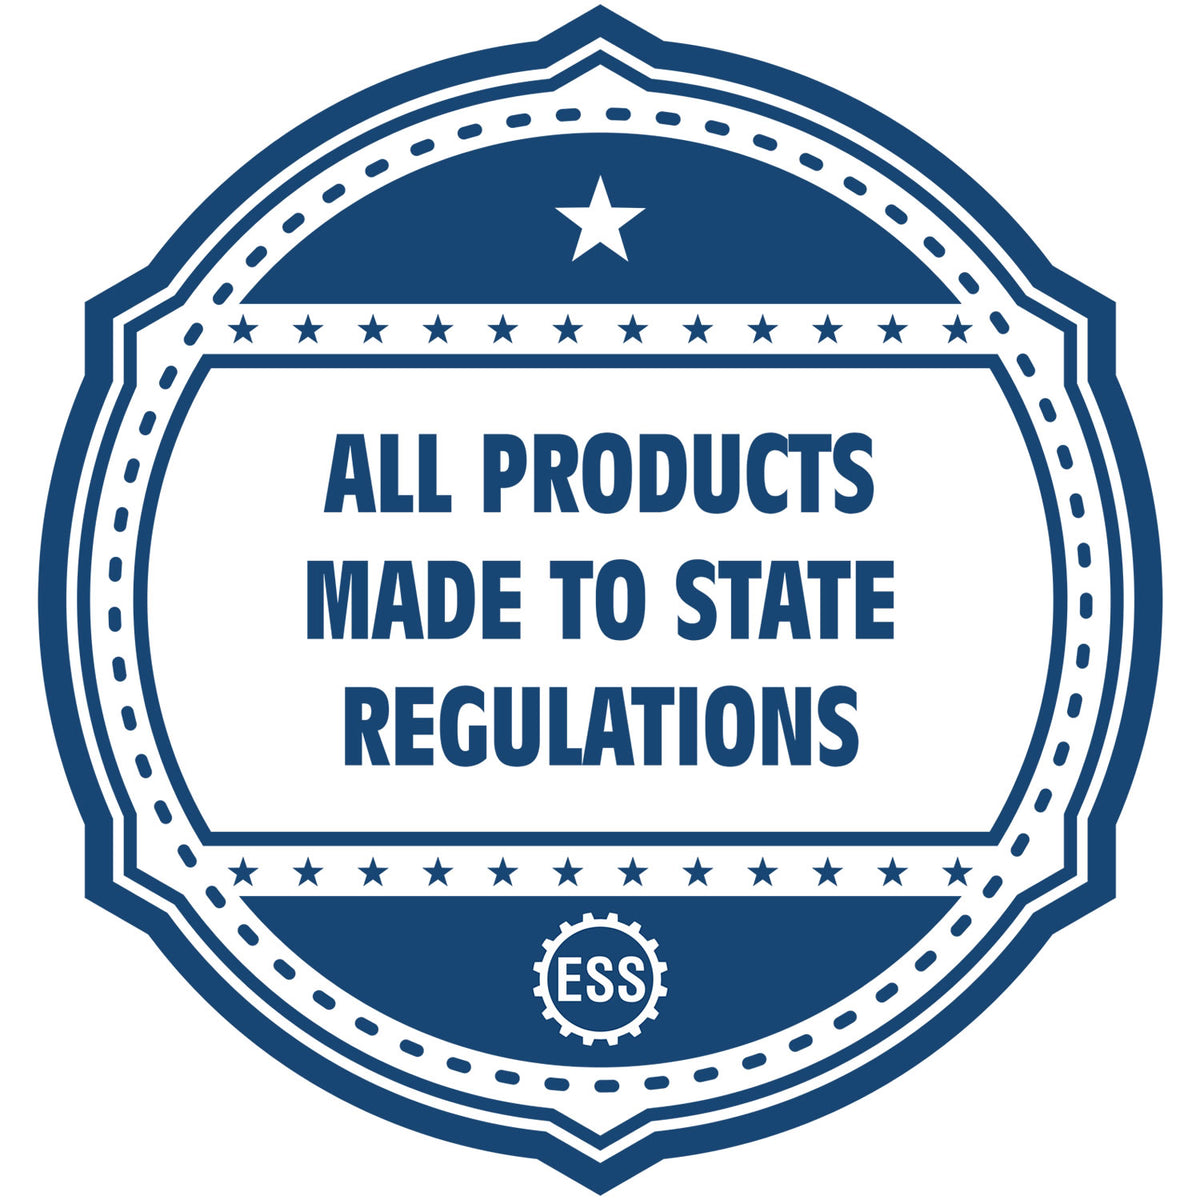 An icon or badge element for the Heavy-Duty Delaware Rectangular Notary Stamp showing that this product is made in compliance with state regulations.